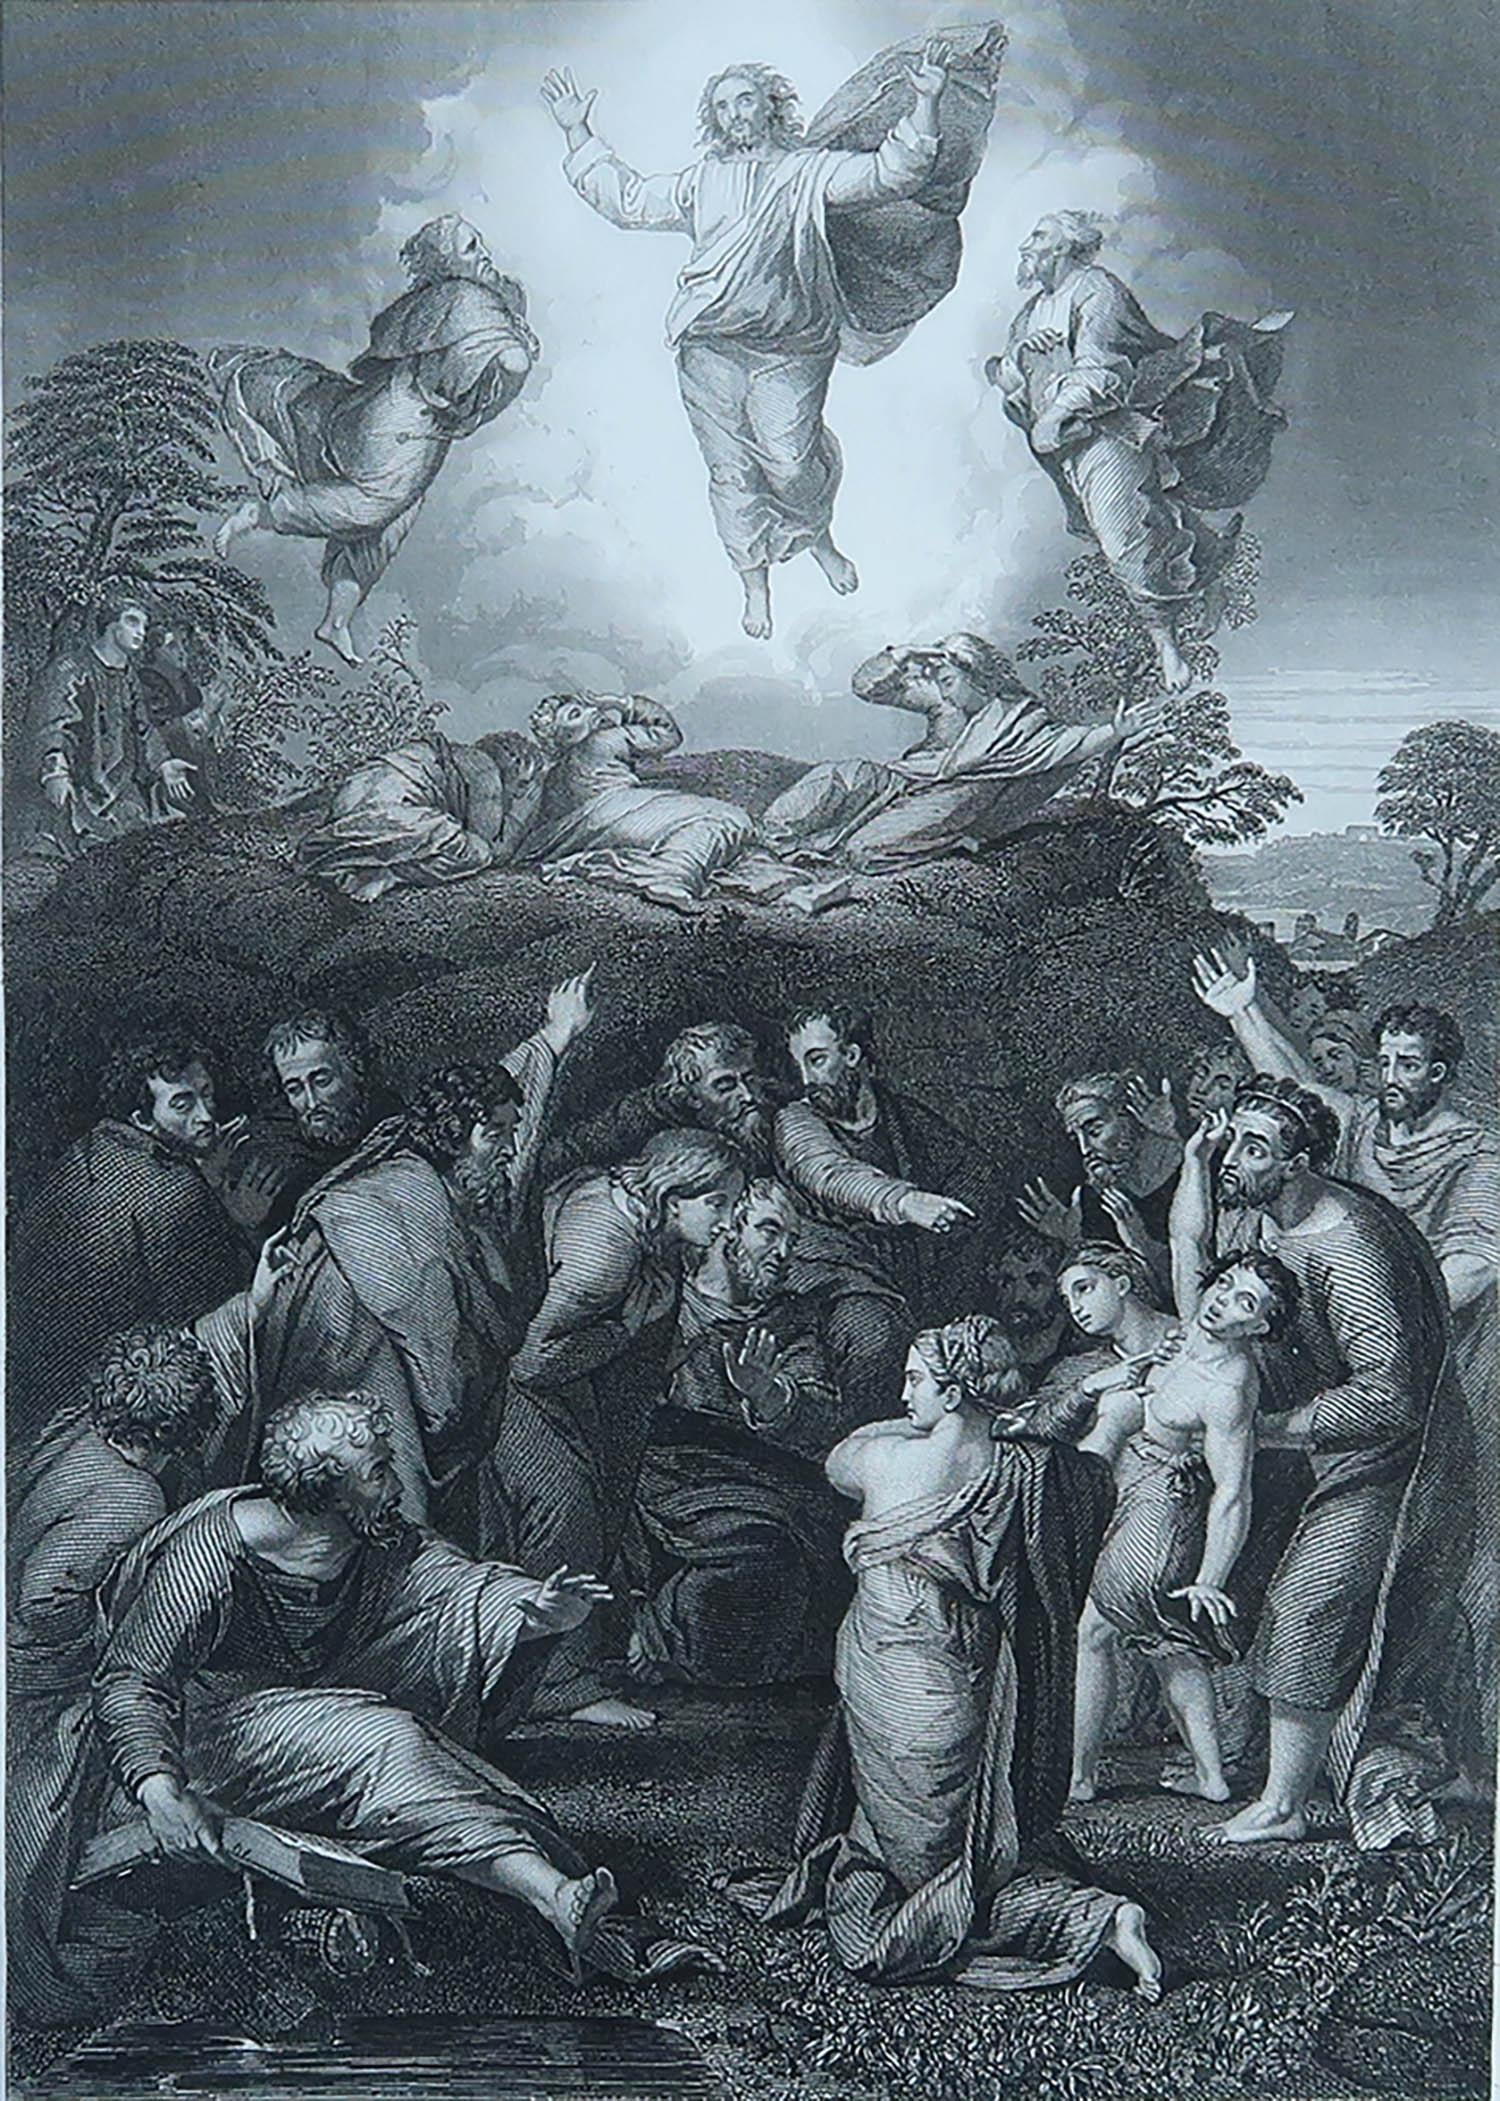 Great image after Raphael

Fine steel engraving

Published by Fisher circa 1850

Unframed.